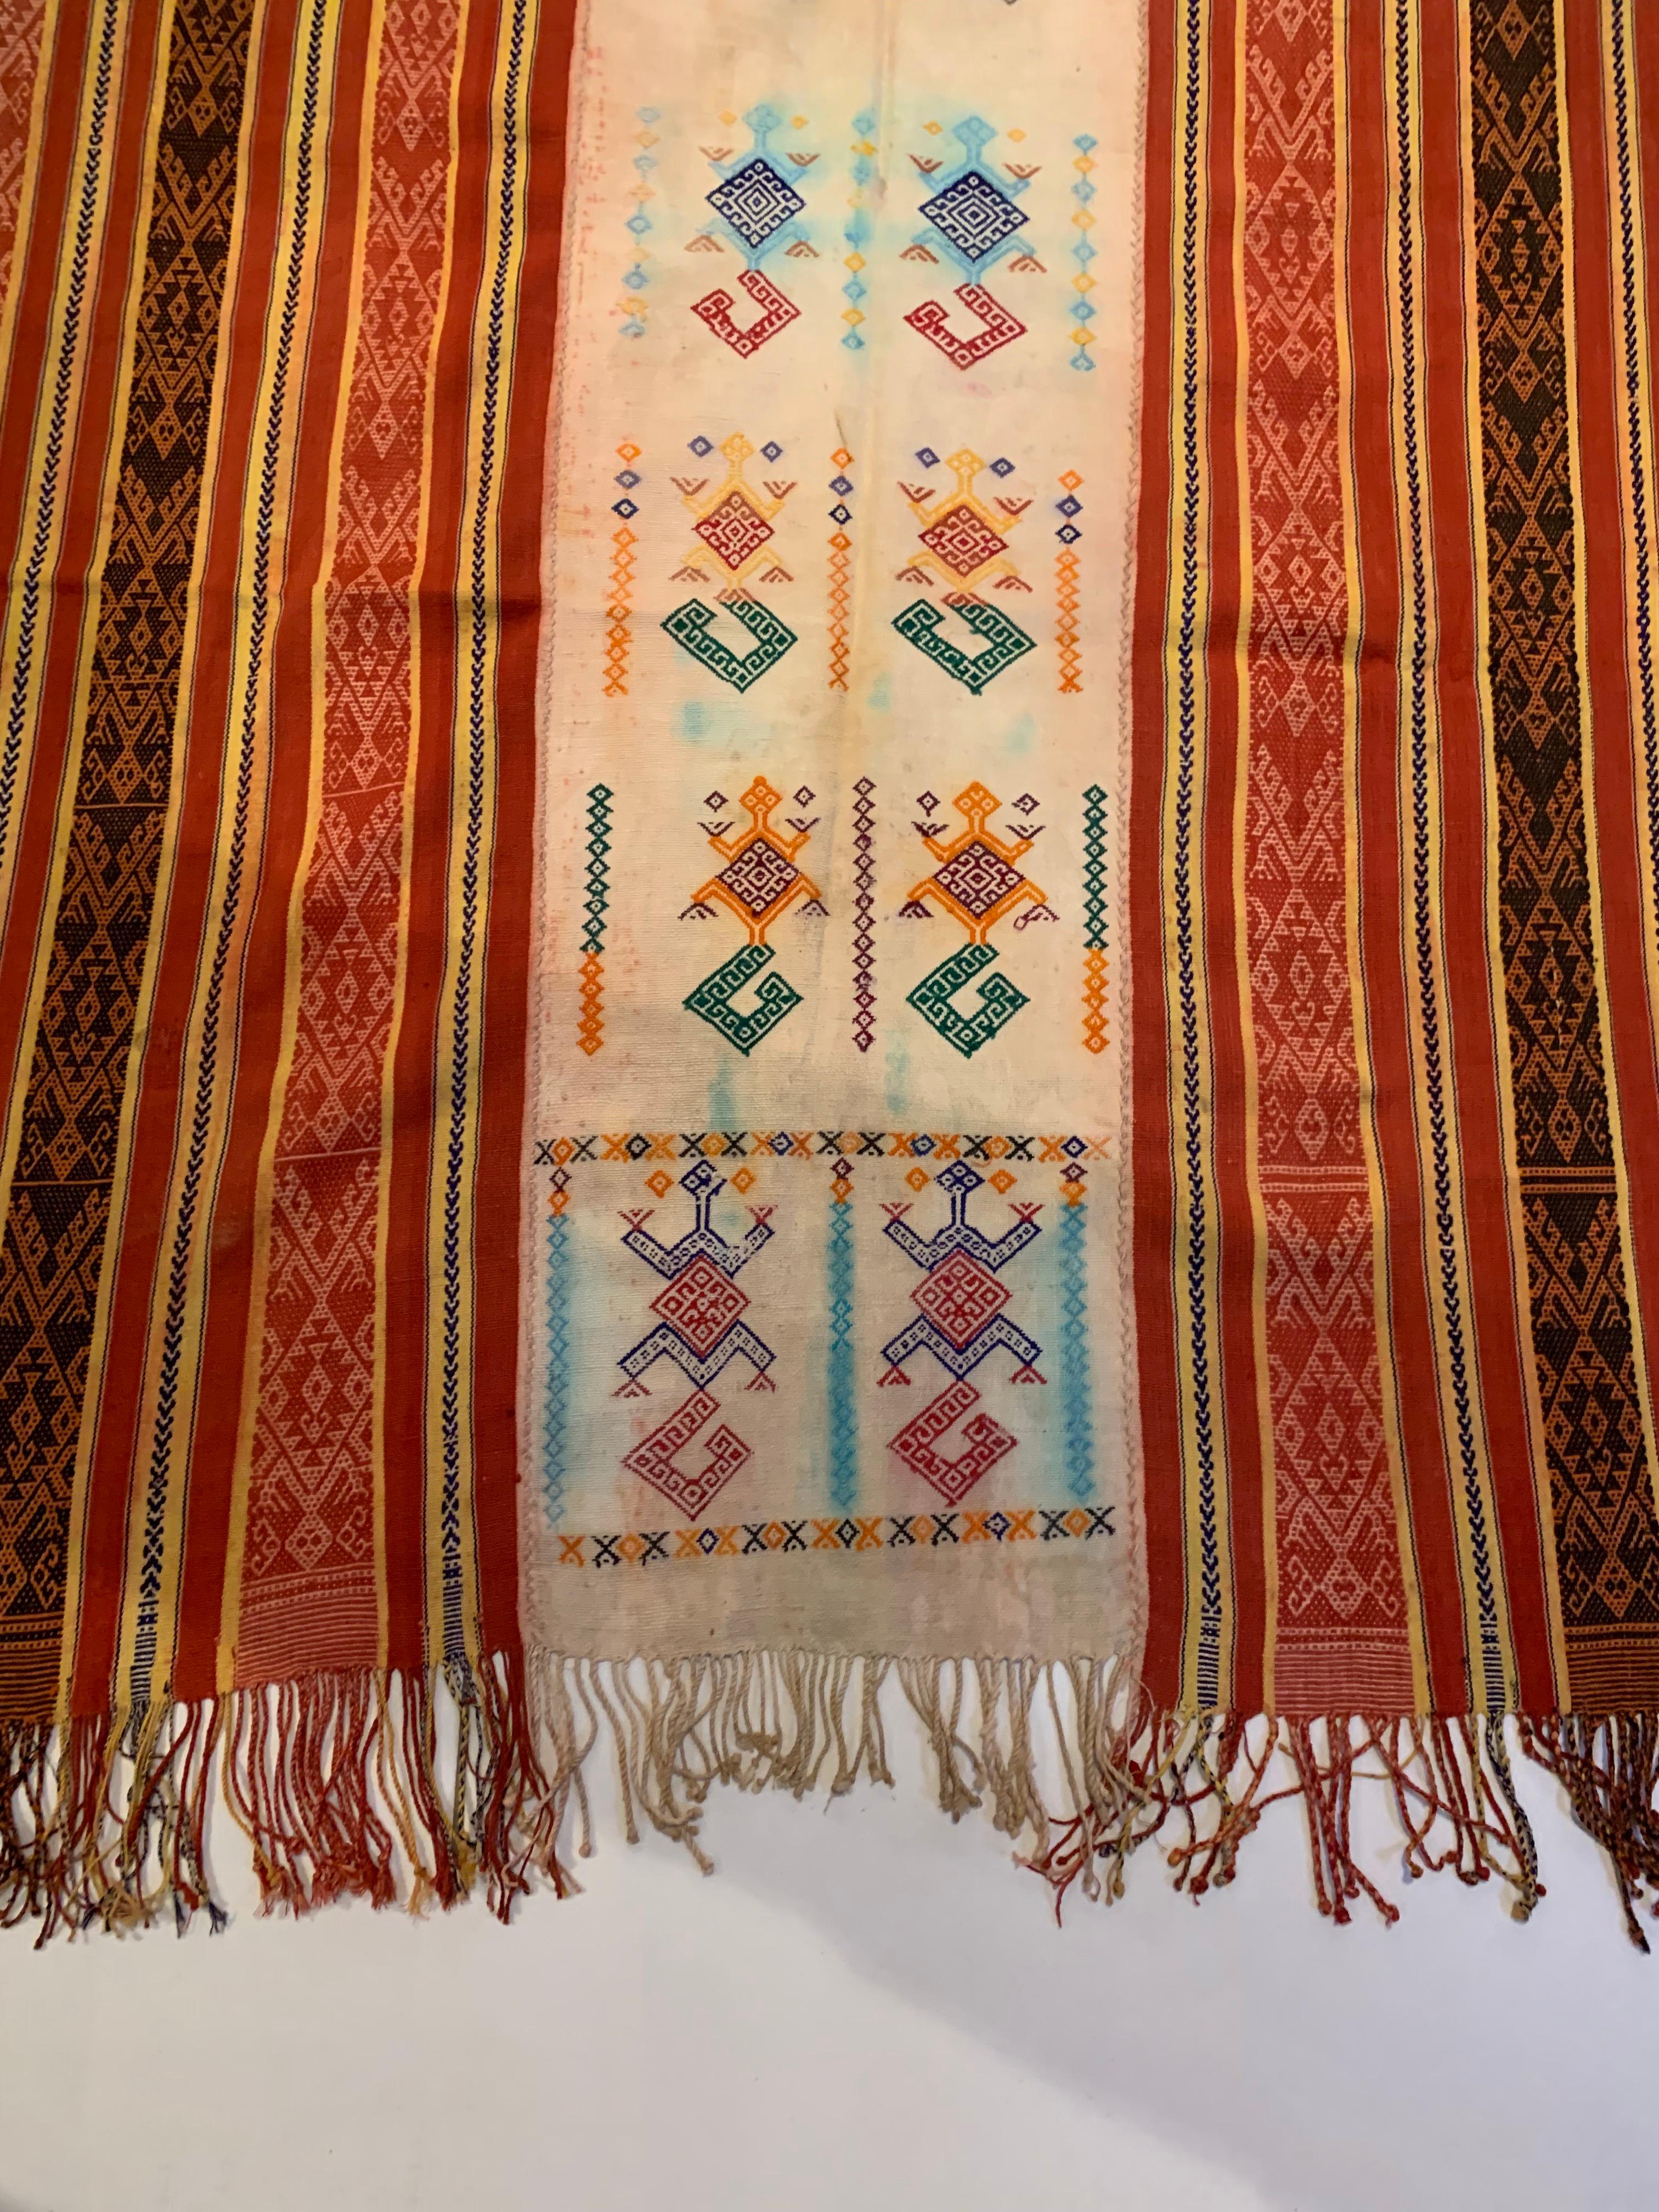 Ikat Textile from Timor Stunning Tribal Motifs & Colors, Indonesia c. 1950 For Sale 3